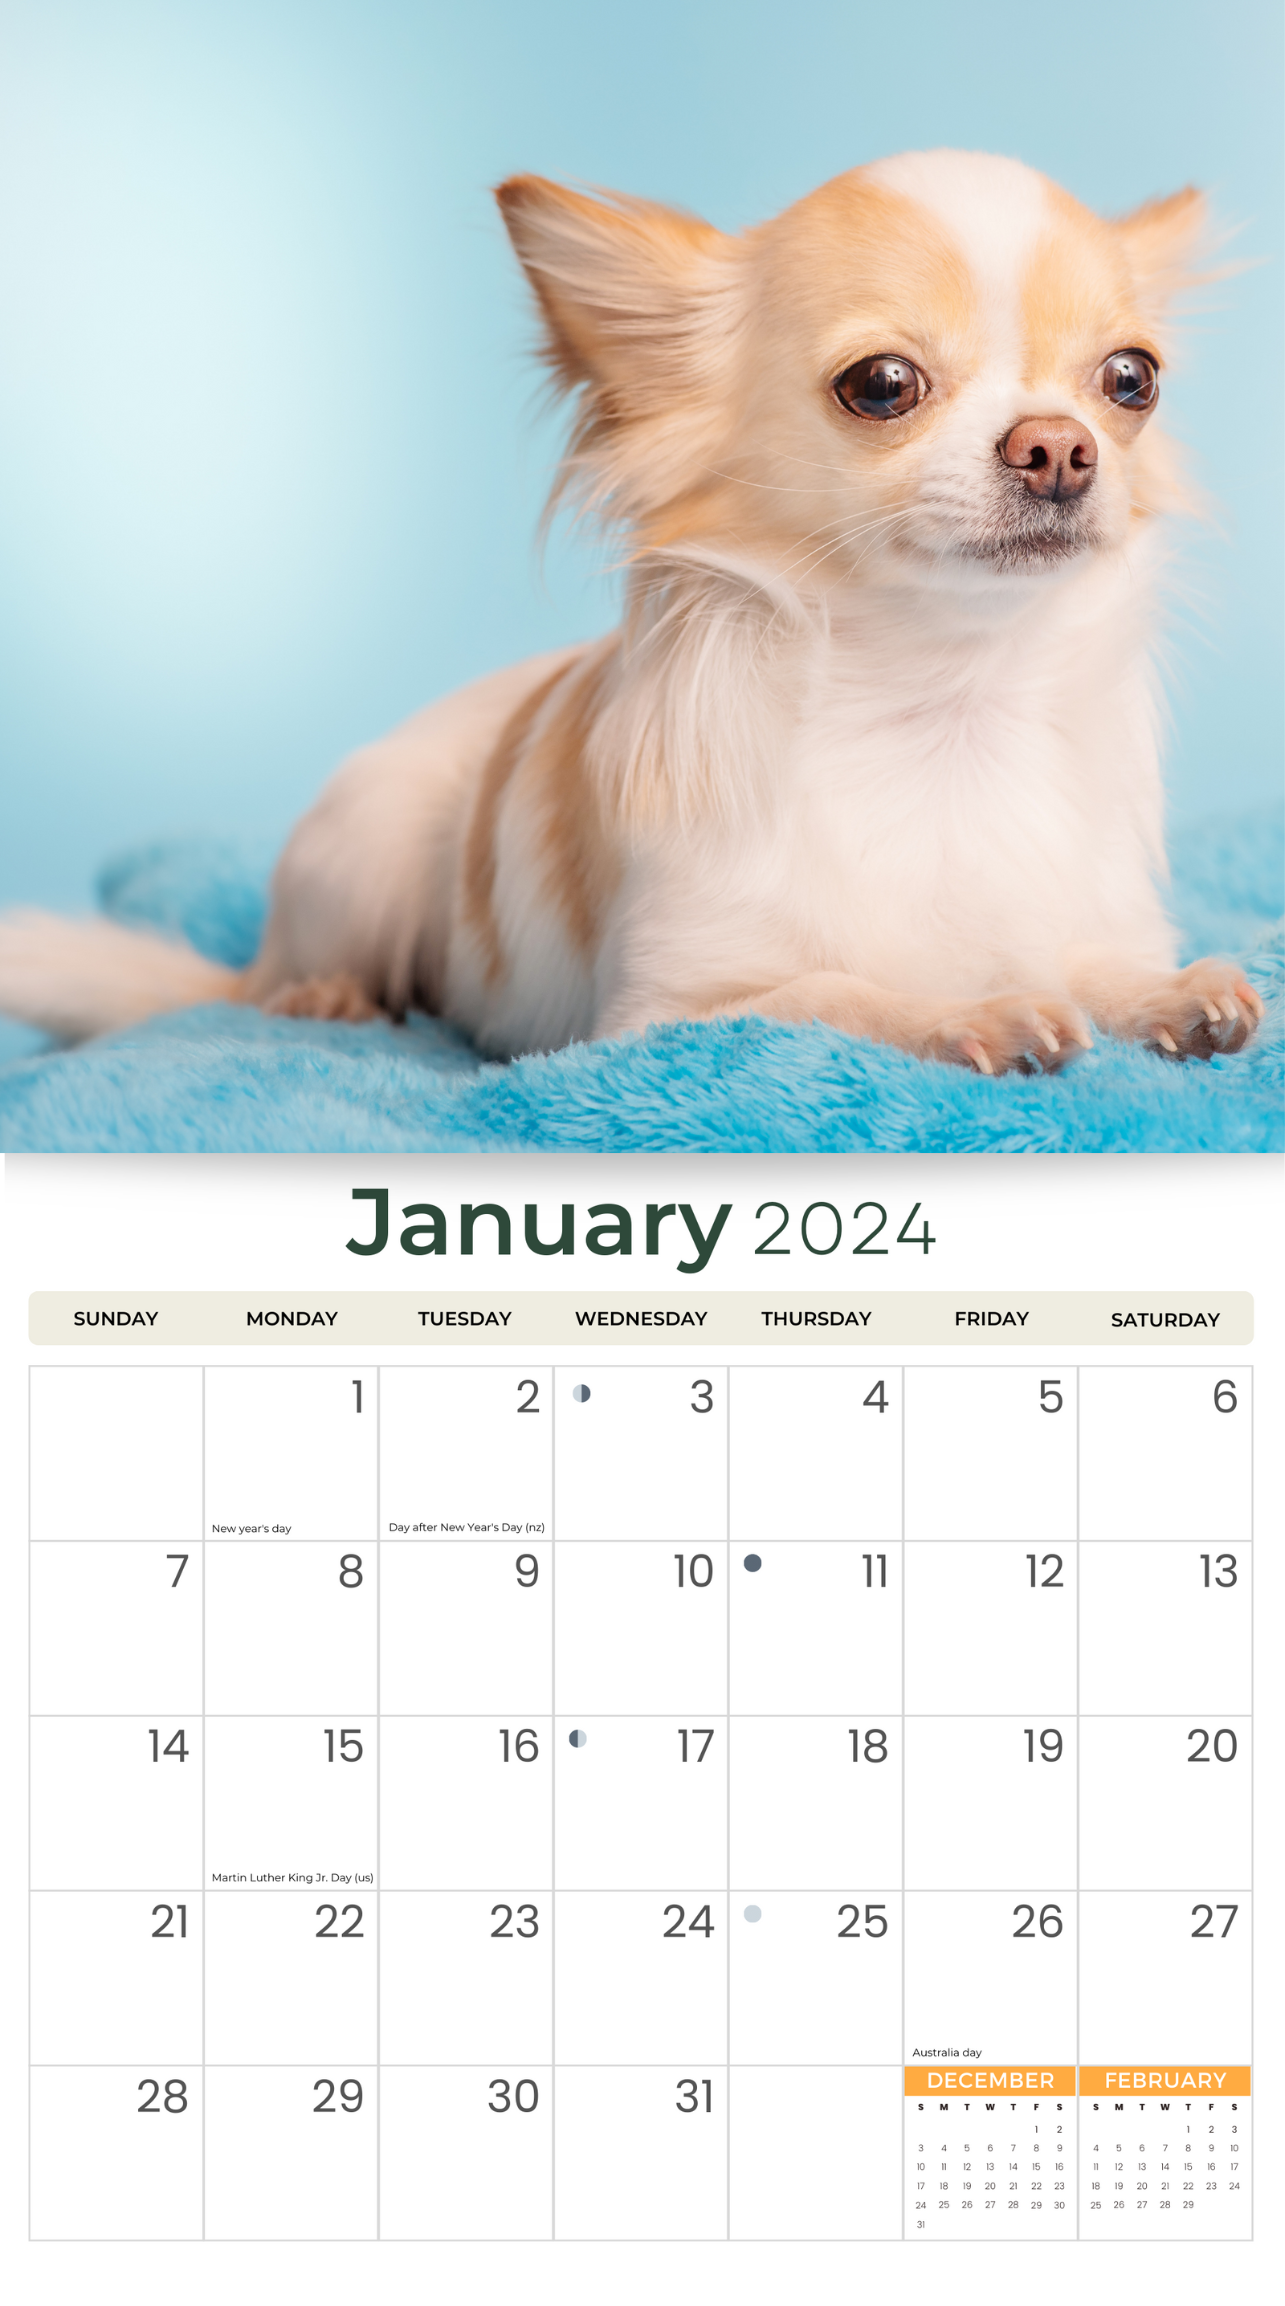 2024 Chihuahuas Dogs & Puppies - Deluxe Wall Calendar by Just Calendars - 16 Month - Plastic Free